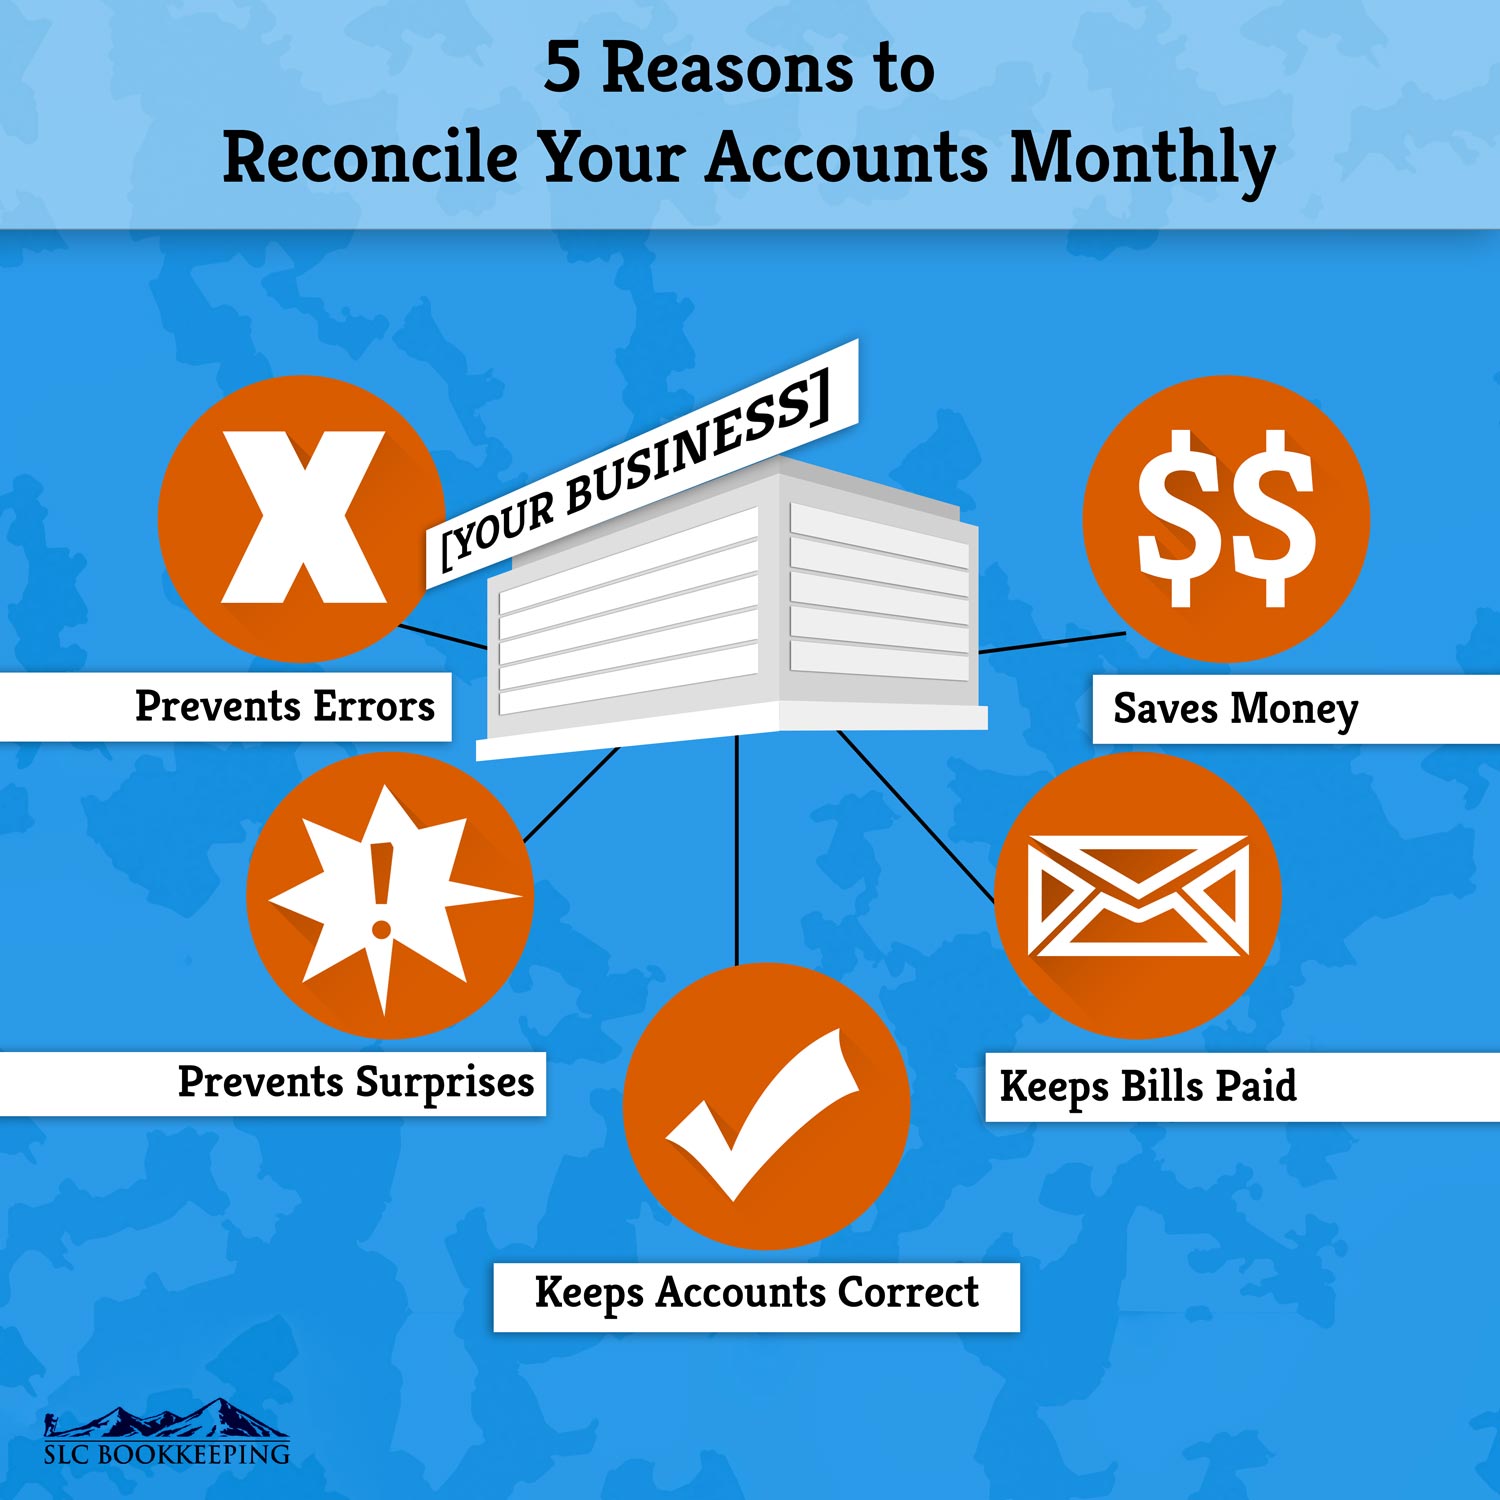 5-Reasons-to-Reconcile-Accounts-Monthly1.jpg